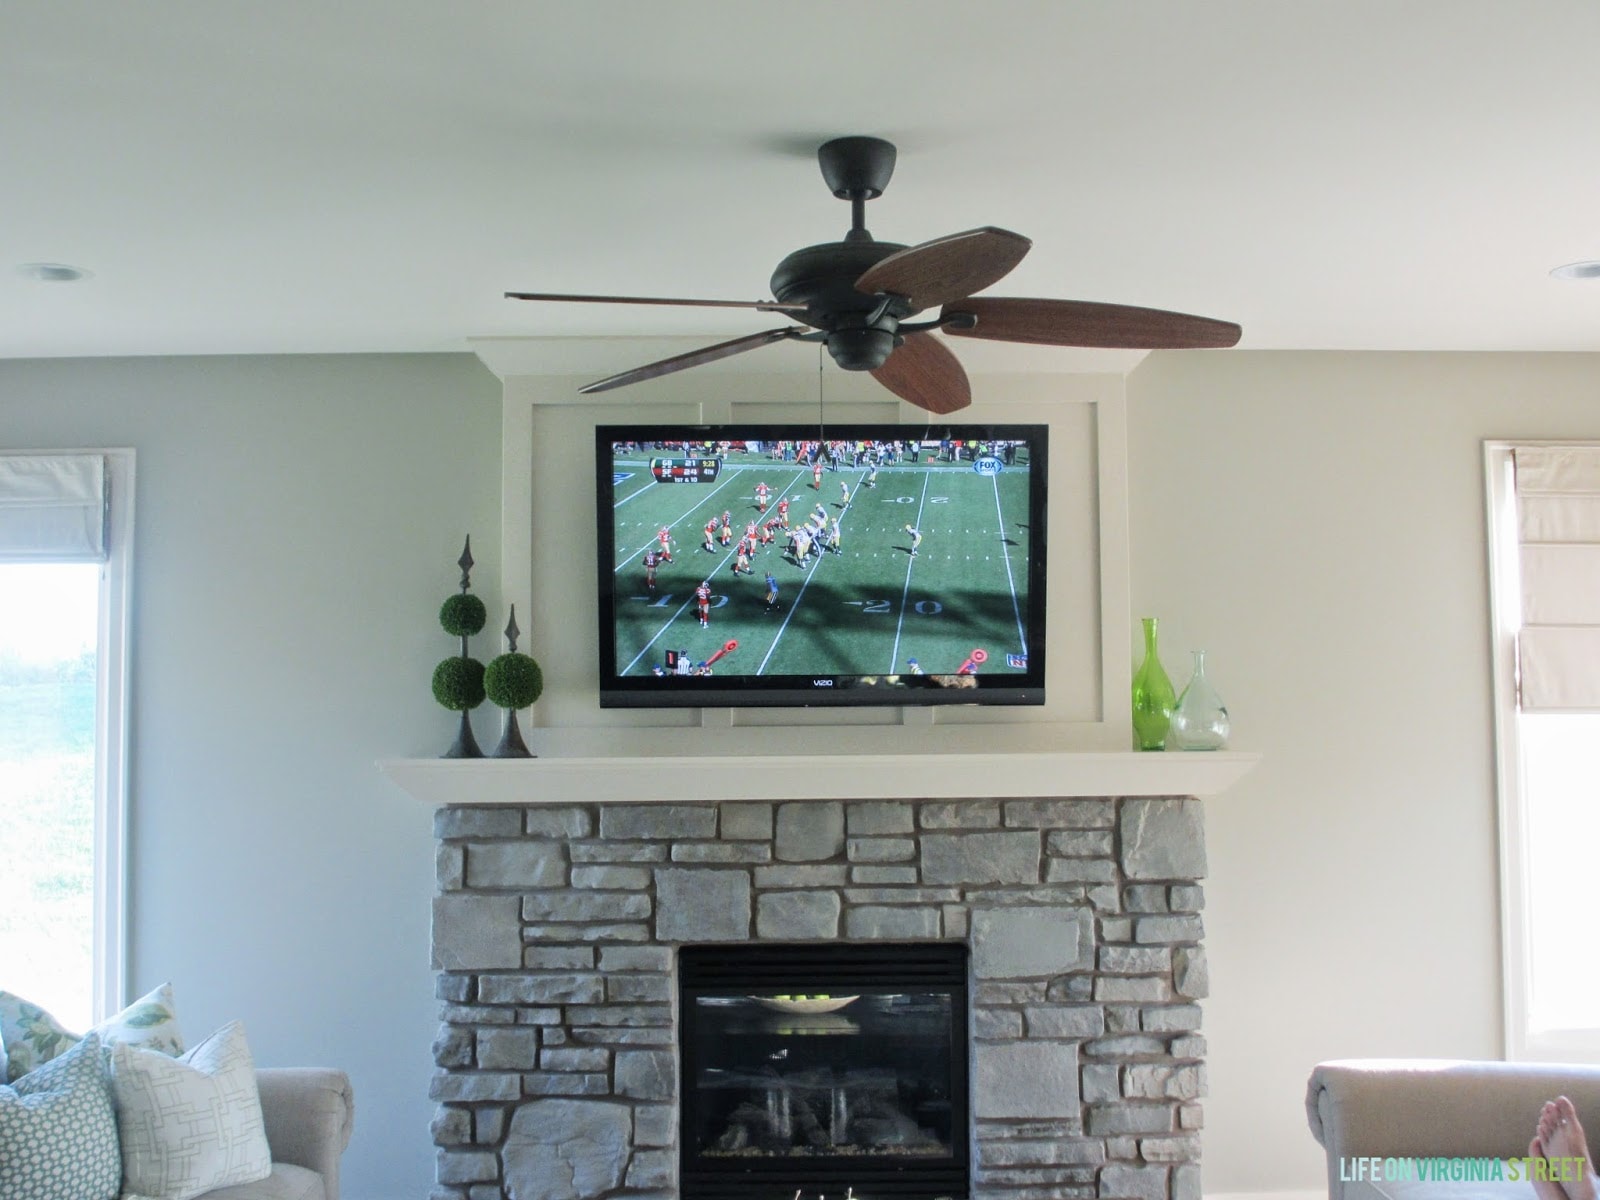 The fireplace with the TV above it and a football game on the TV. A ceiling fan hanging in the room.